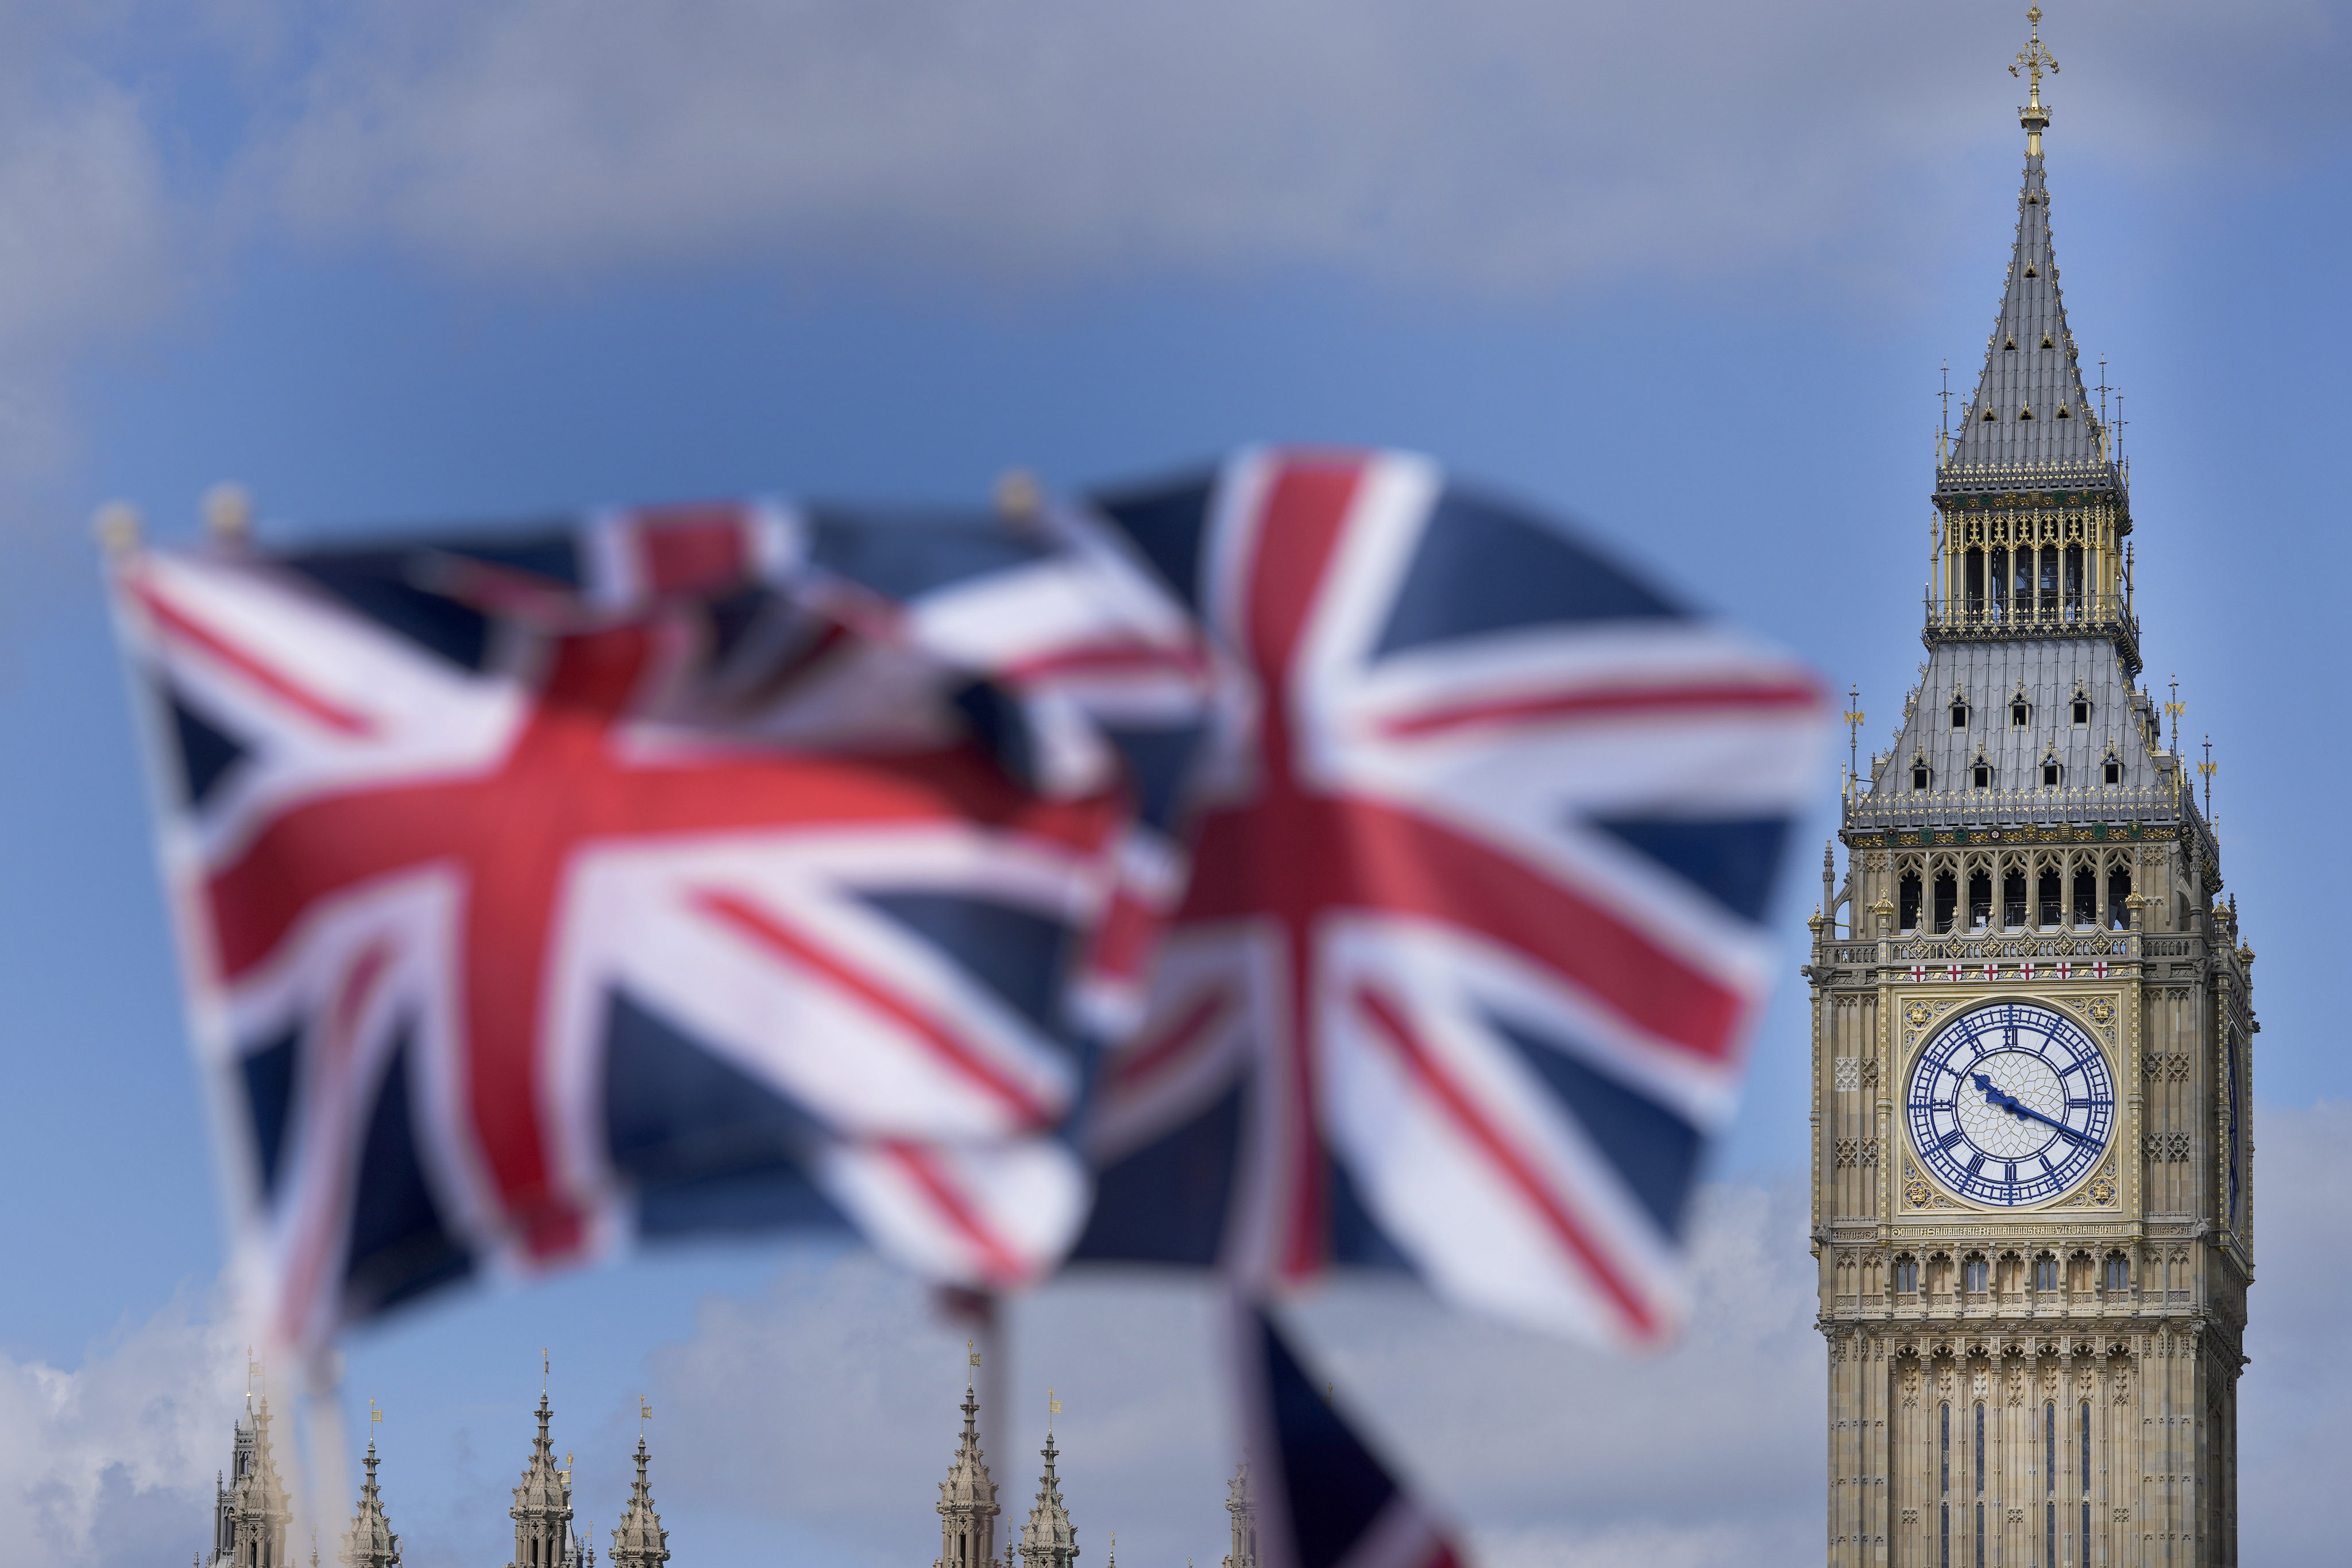 Union Jack flags are seen in front of the Elizabeth Tower, known as Big Ben, beside the Houses of Parliament in London in June 2022. Photo: AP